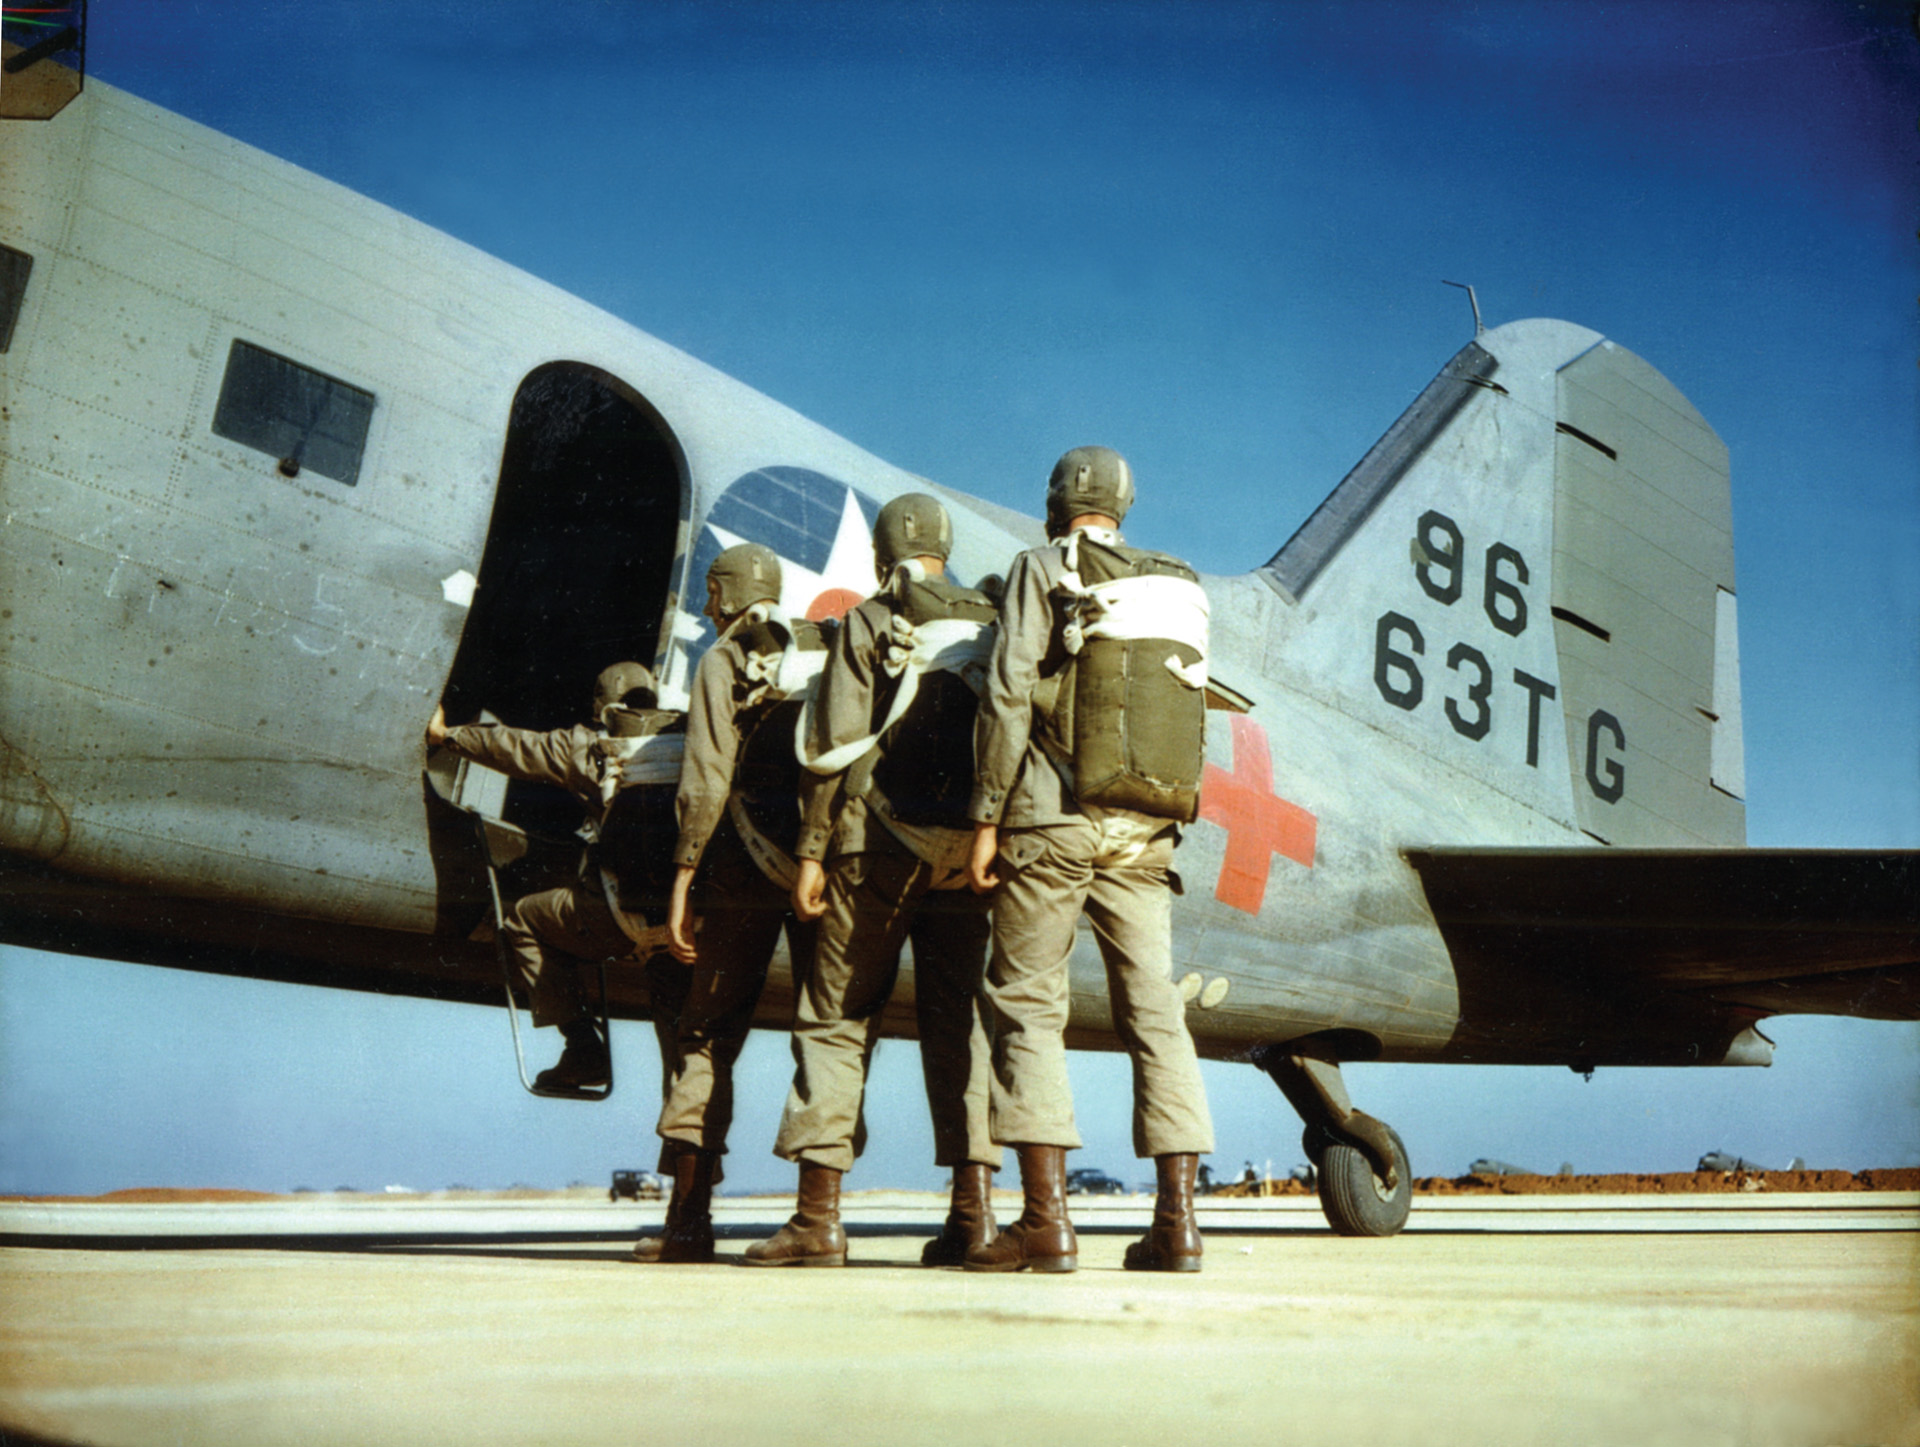 New recruits wearing soft headgear board a C-47 for their first practice jump.